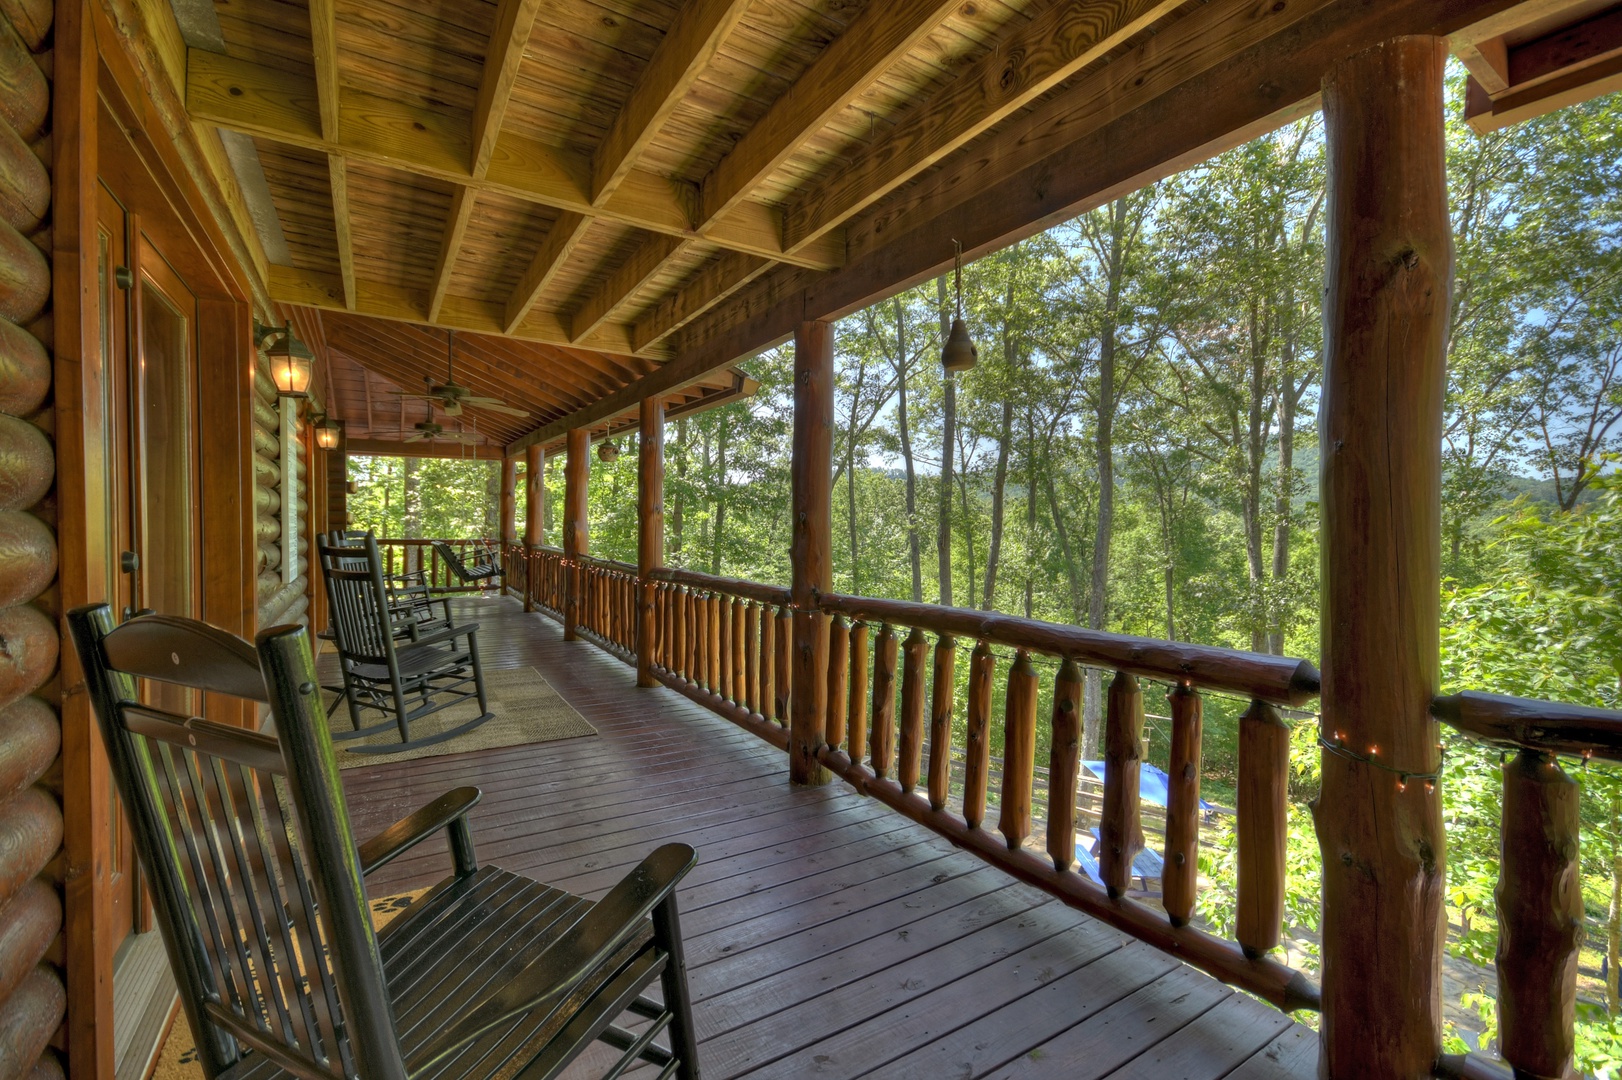 Whippoorwill Calling - Entry Level Deck